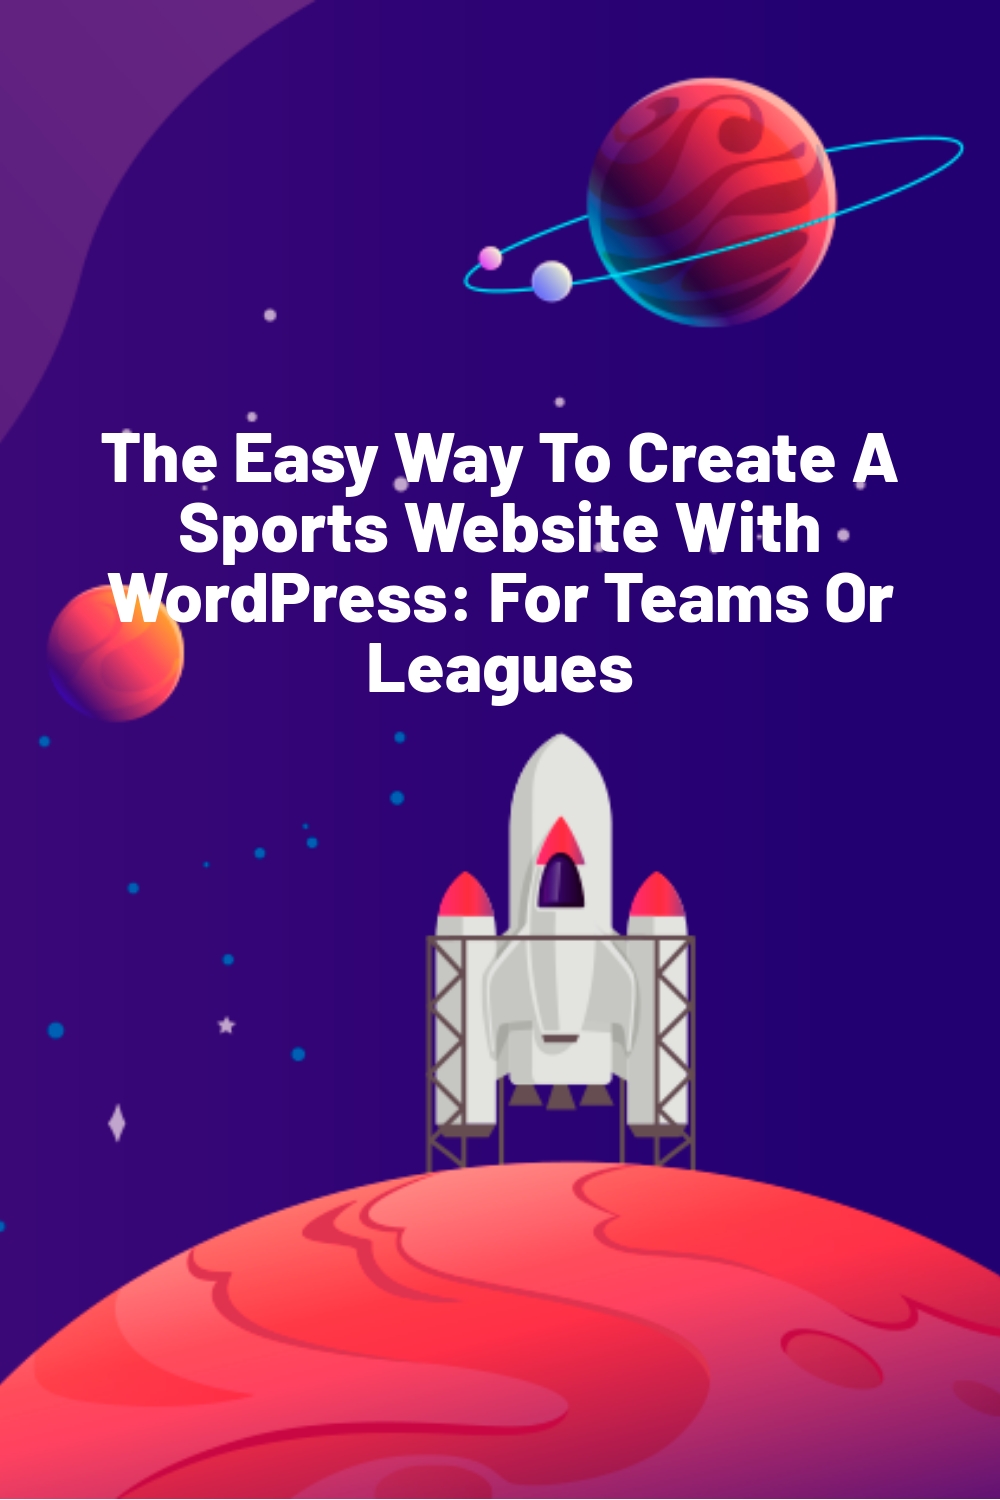 The Easy Way To Create A Sports Website With WordPress: For Teams Or Leagues